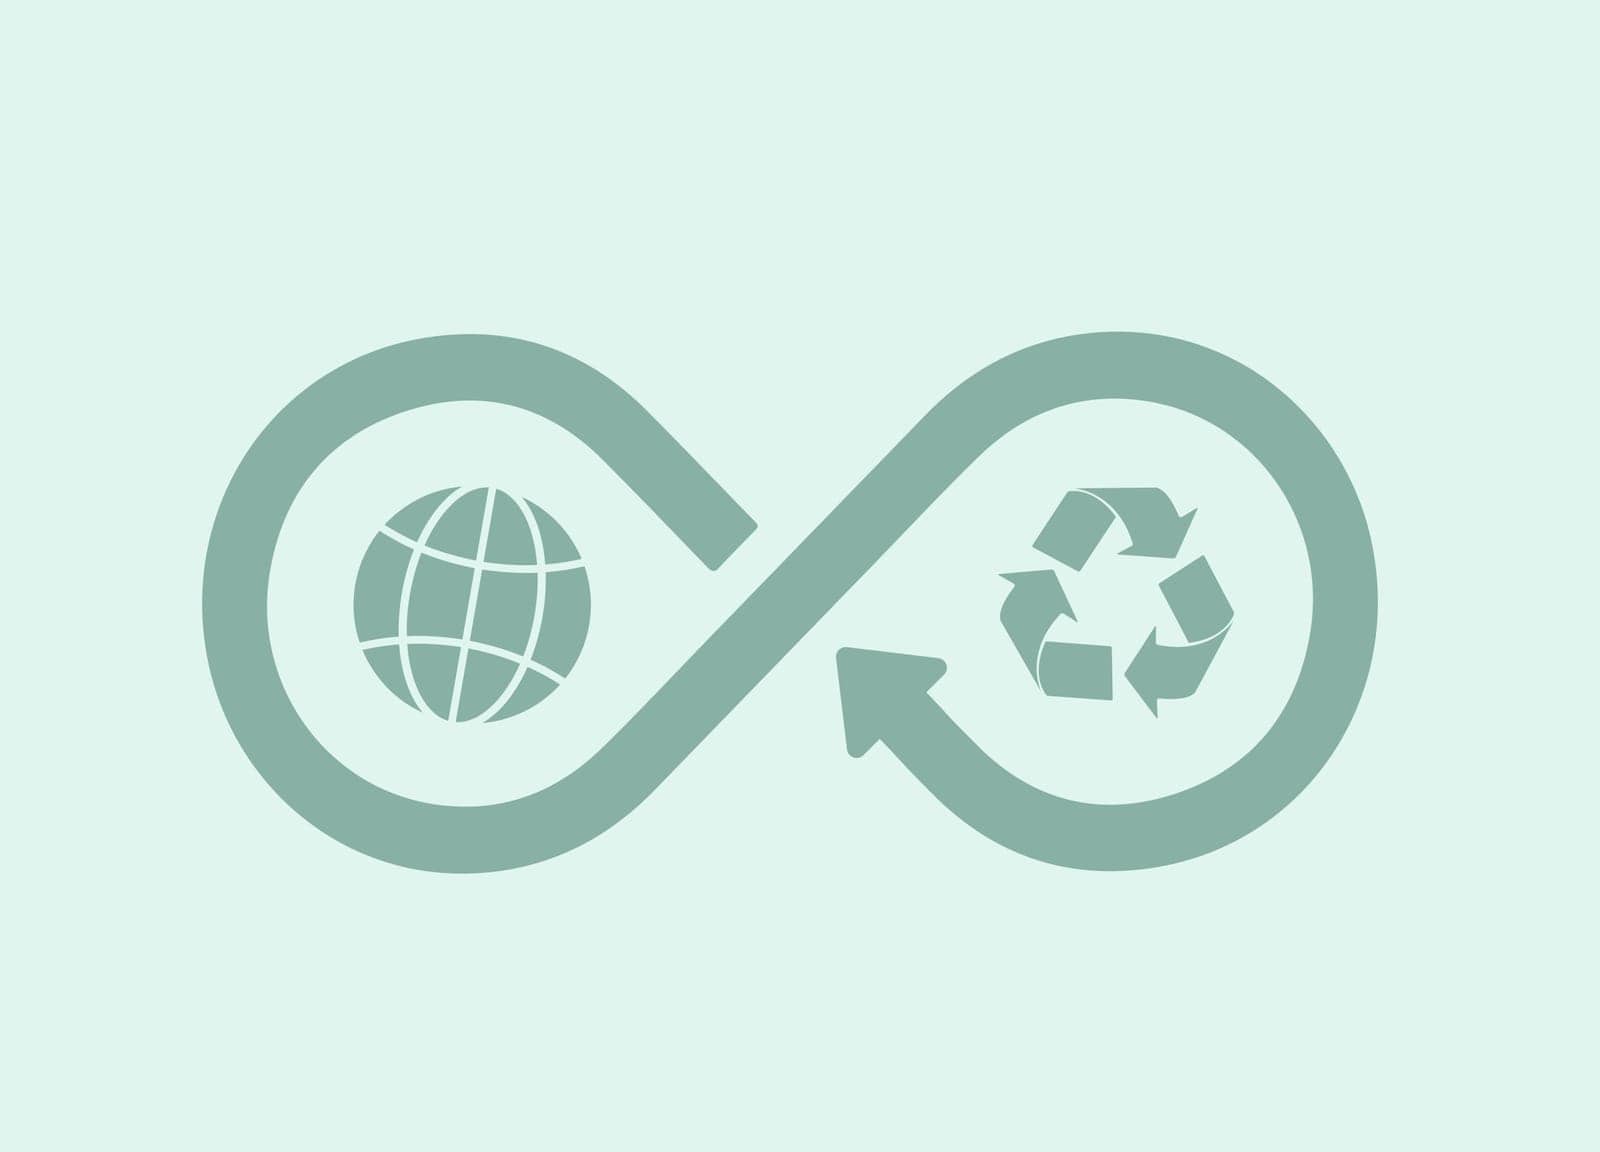 Circular economy - sustainable, eco-friendly solutions. Reusable resources, recycling, and environmental protection. Circular economy cycle with globe and recycle icons. Vector illustration.